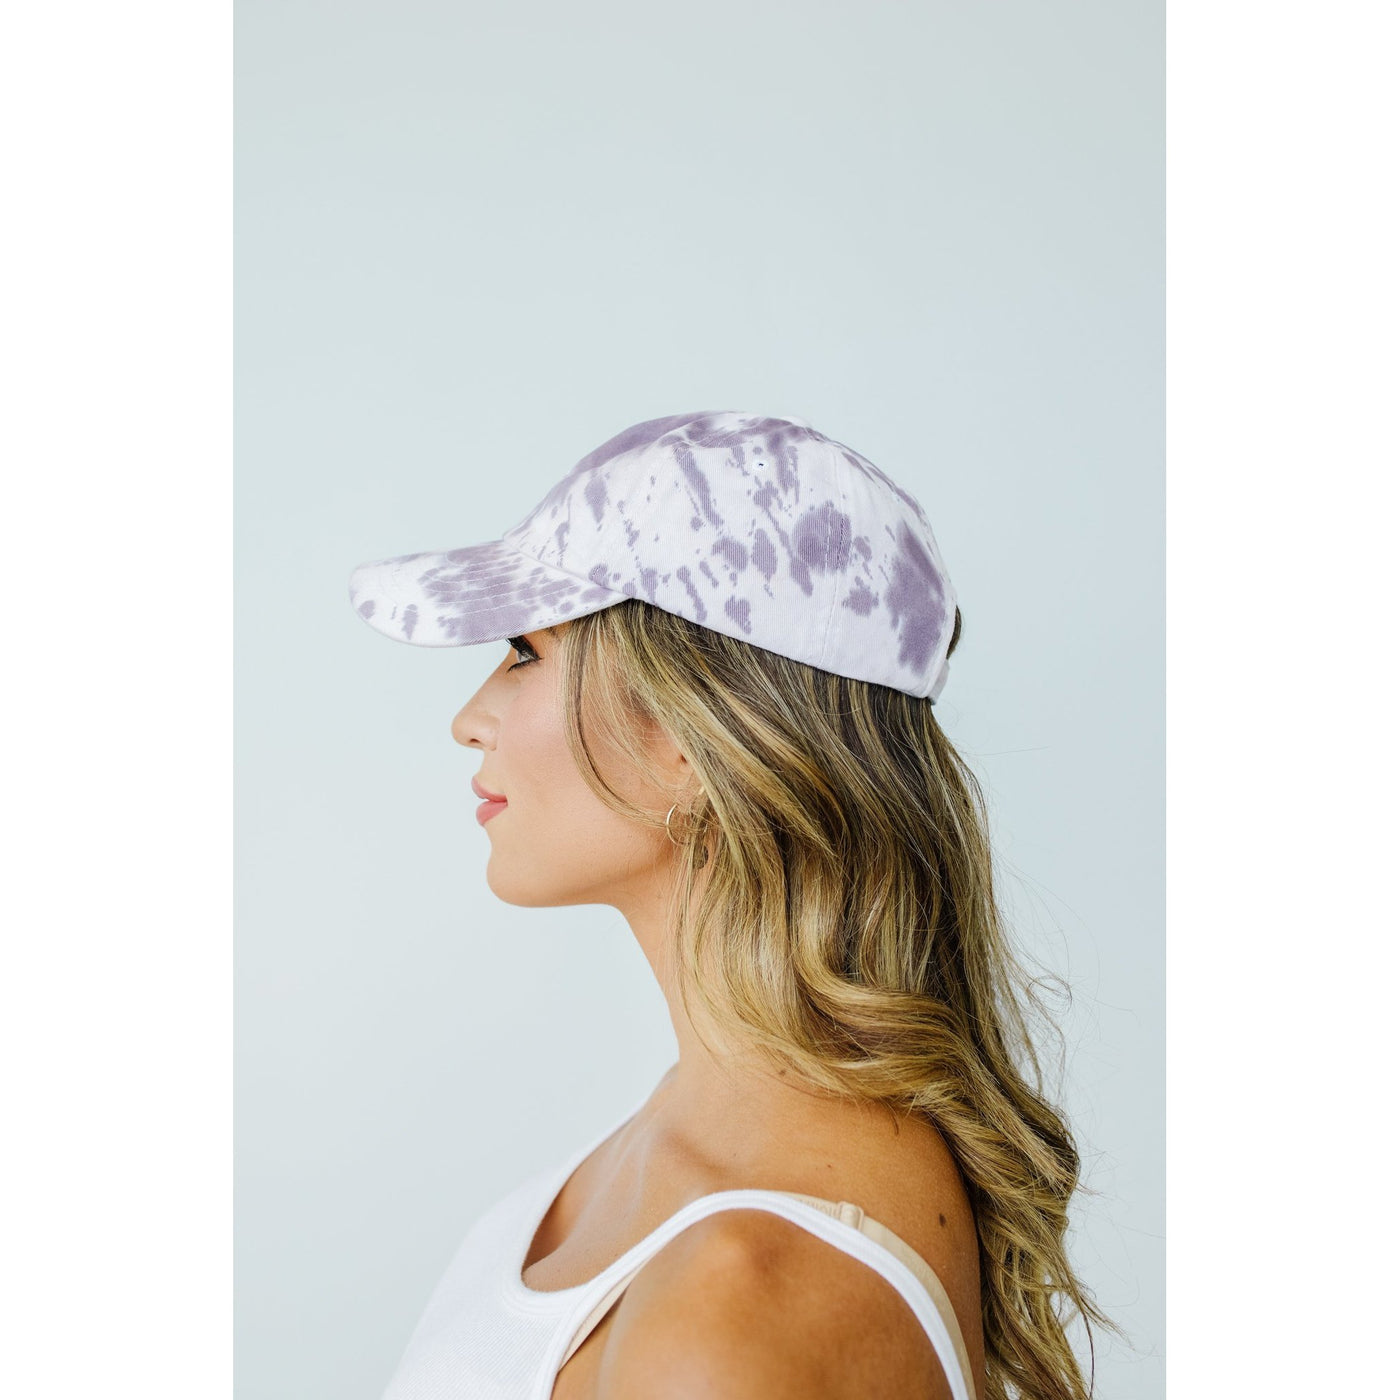 Bed Head Tie Dye Cap In Storm Gray-Womens-Graceful & Chic Boutique, Family Clothing Store in Waxahachie, Texas